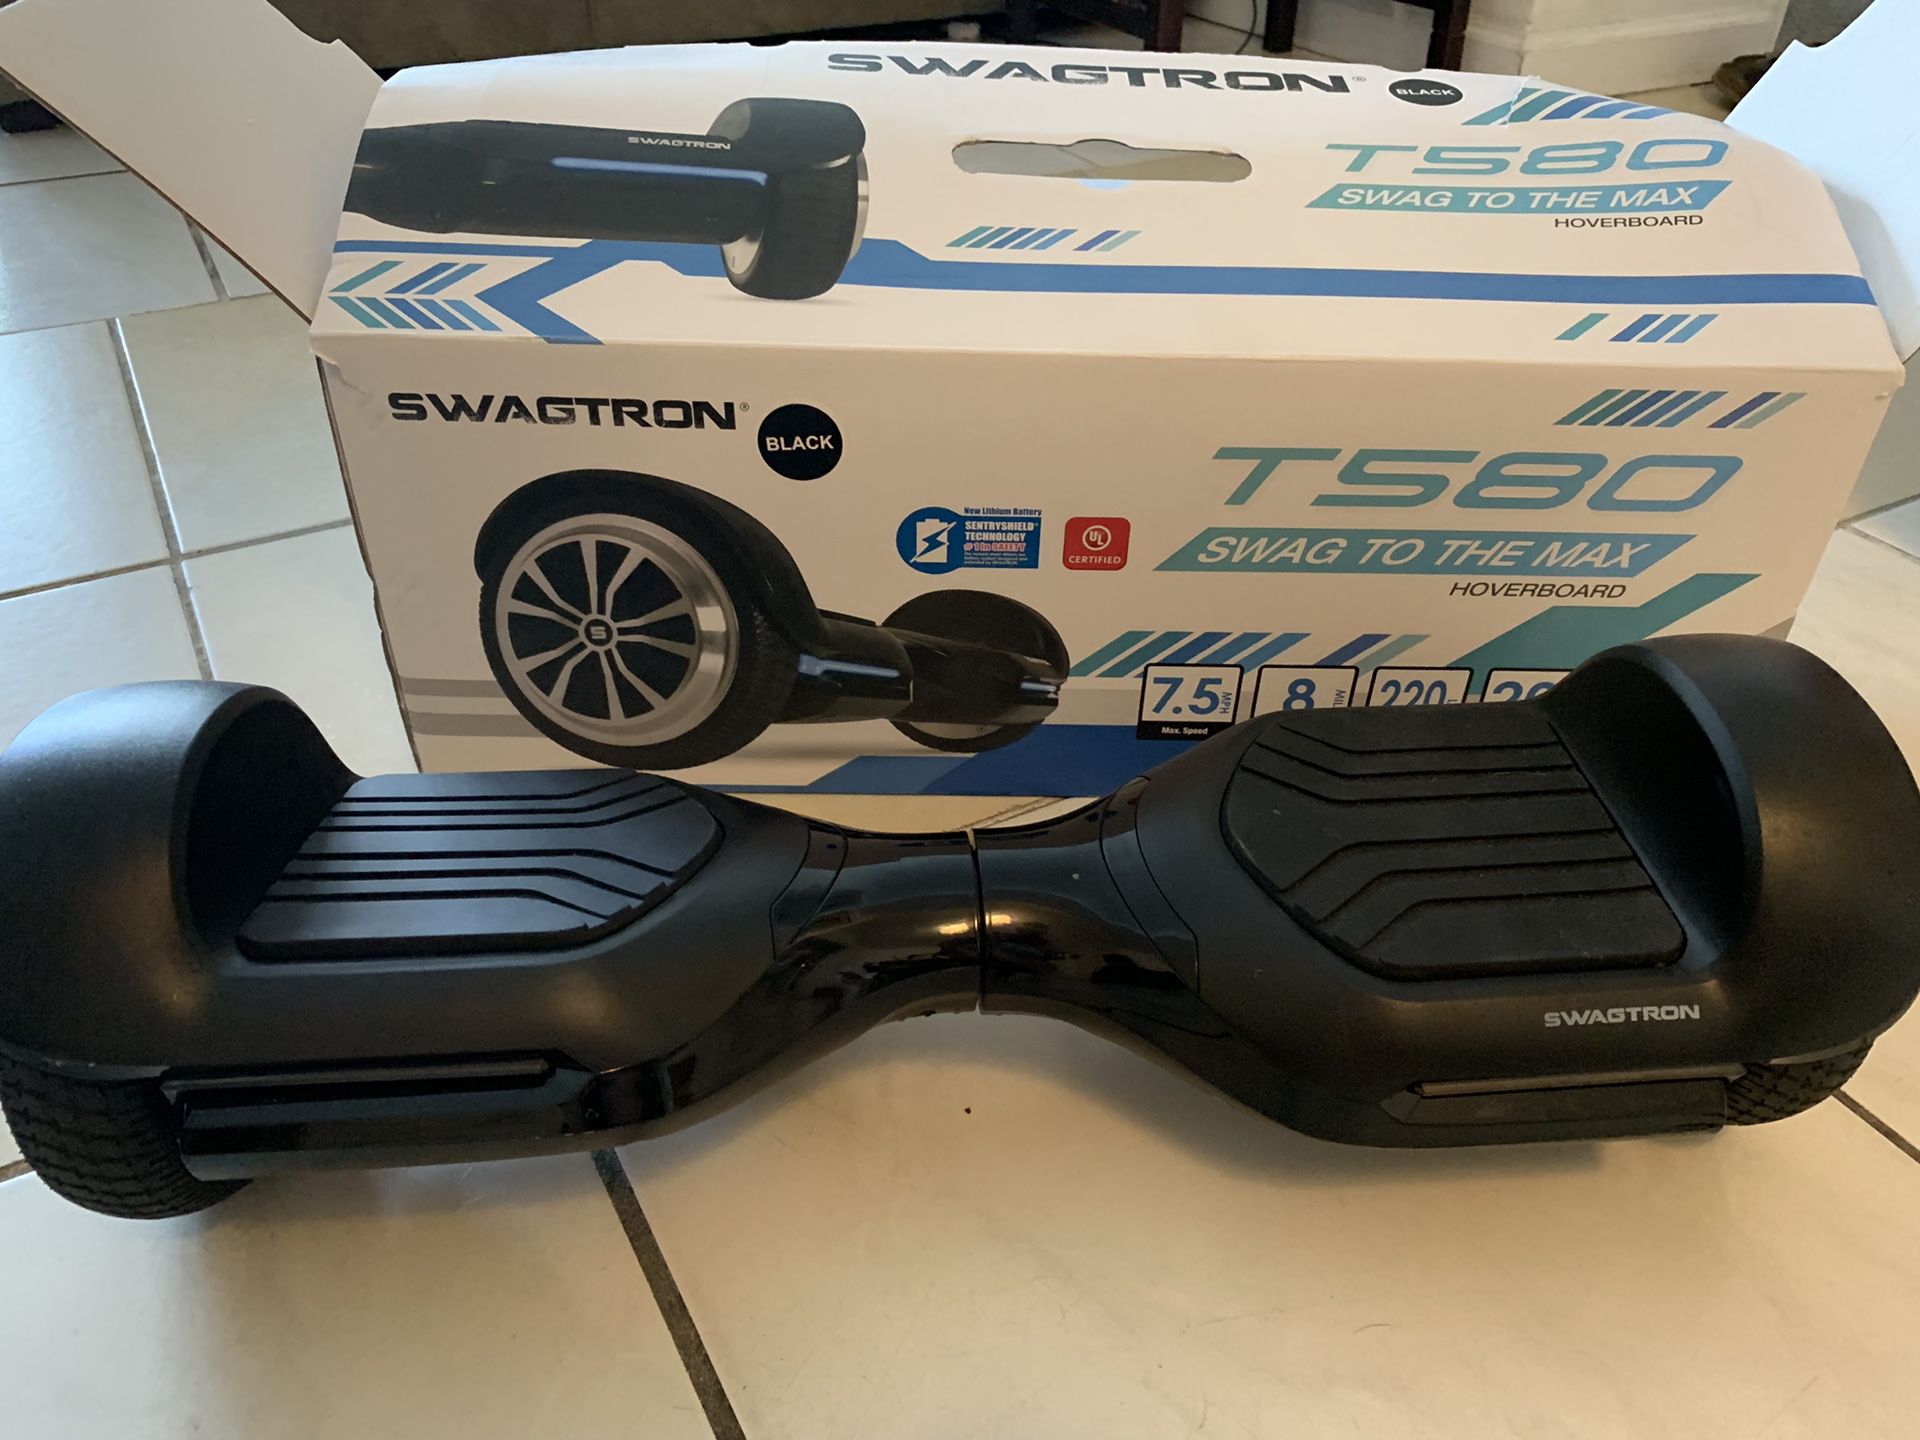 Swagtron Swagboard Vibe T580 App-Enabled Bluetooth Hoverboard w/Bluetooth NEW WITH BOX!!!